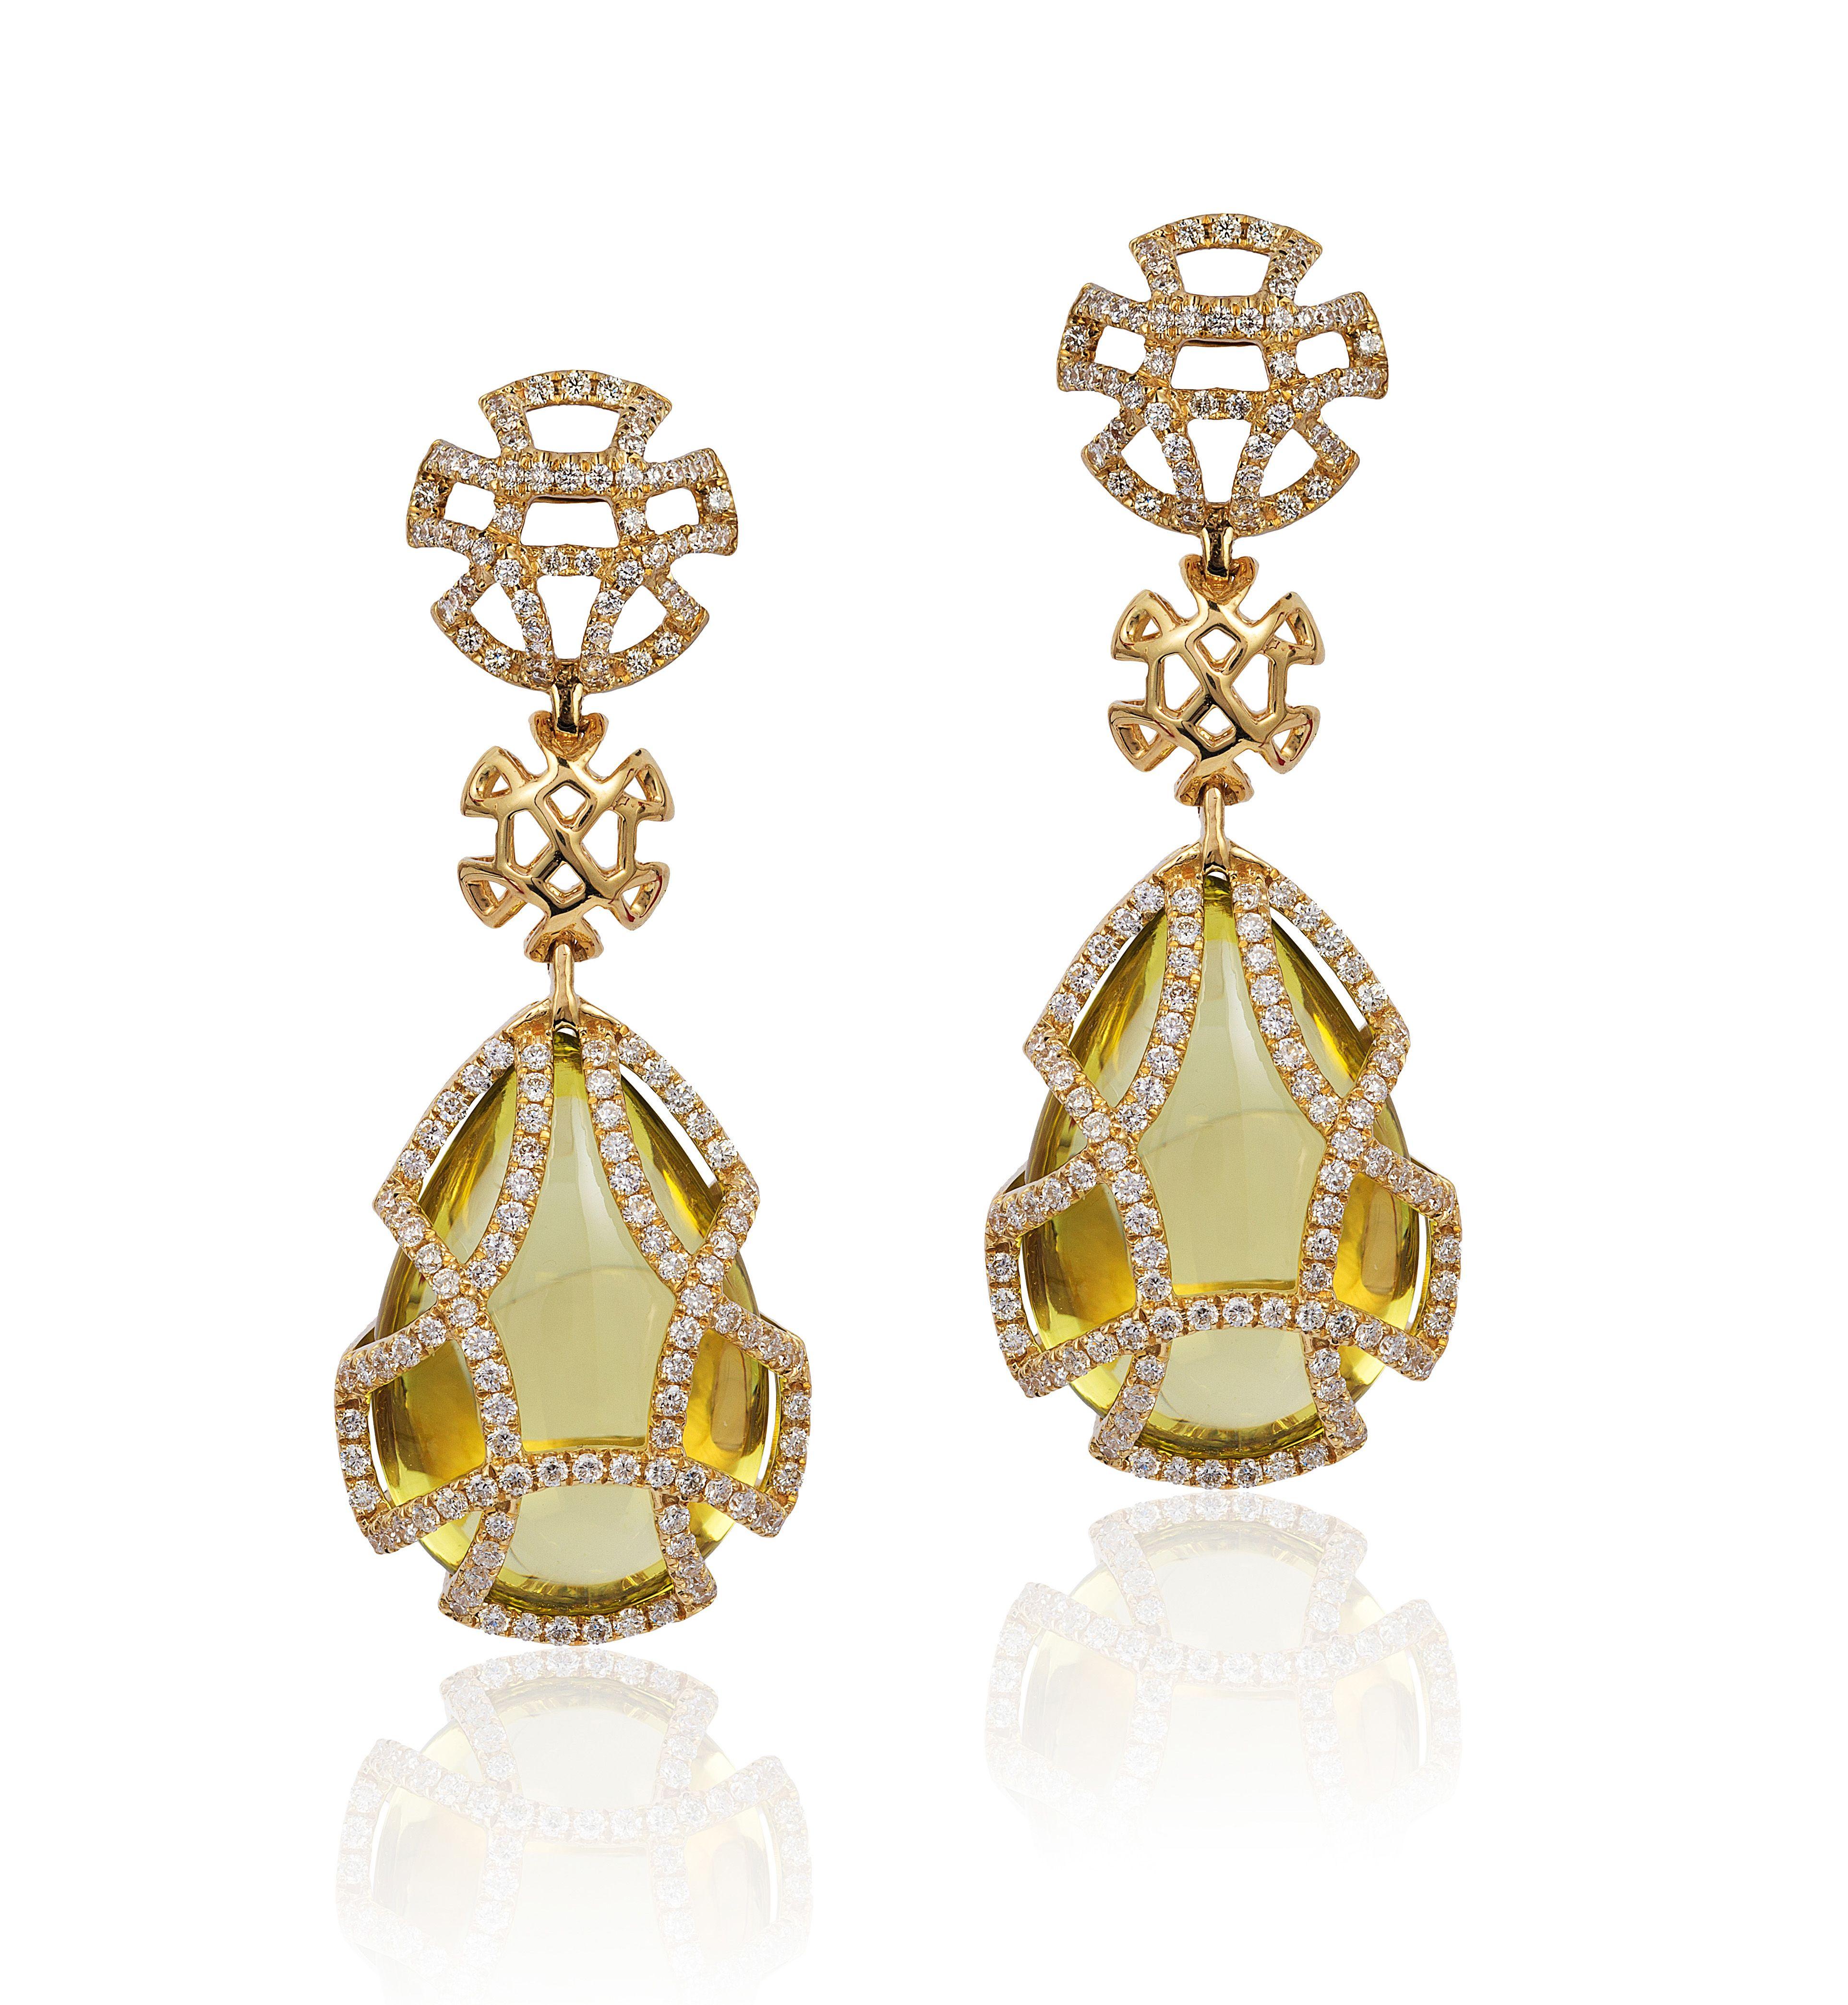 Lemon Quartz Teardrop Cage Earring with Diamonds in 18K Yellow Gold from 'Freedom